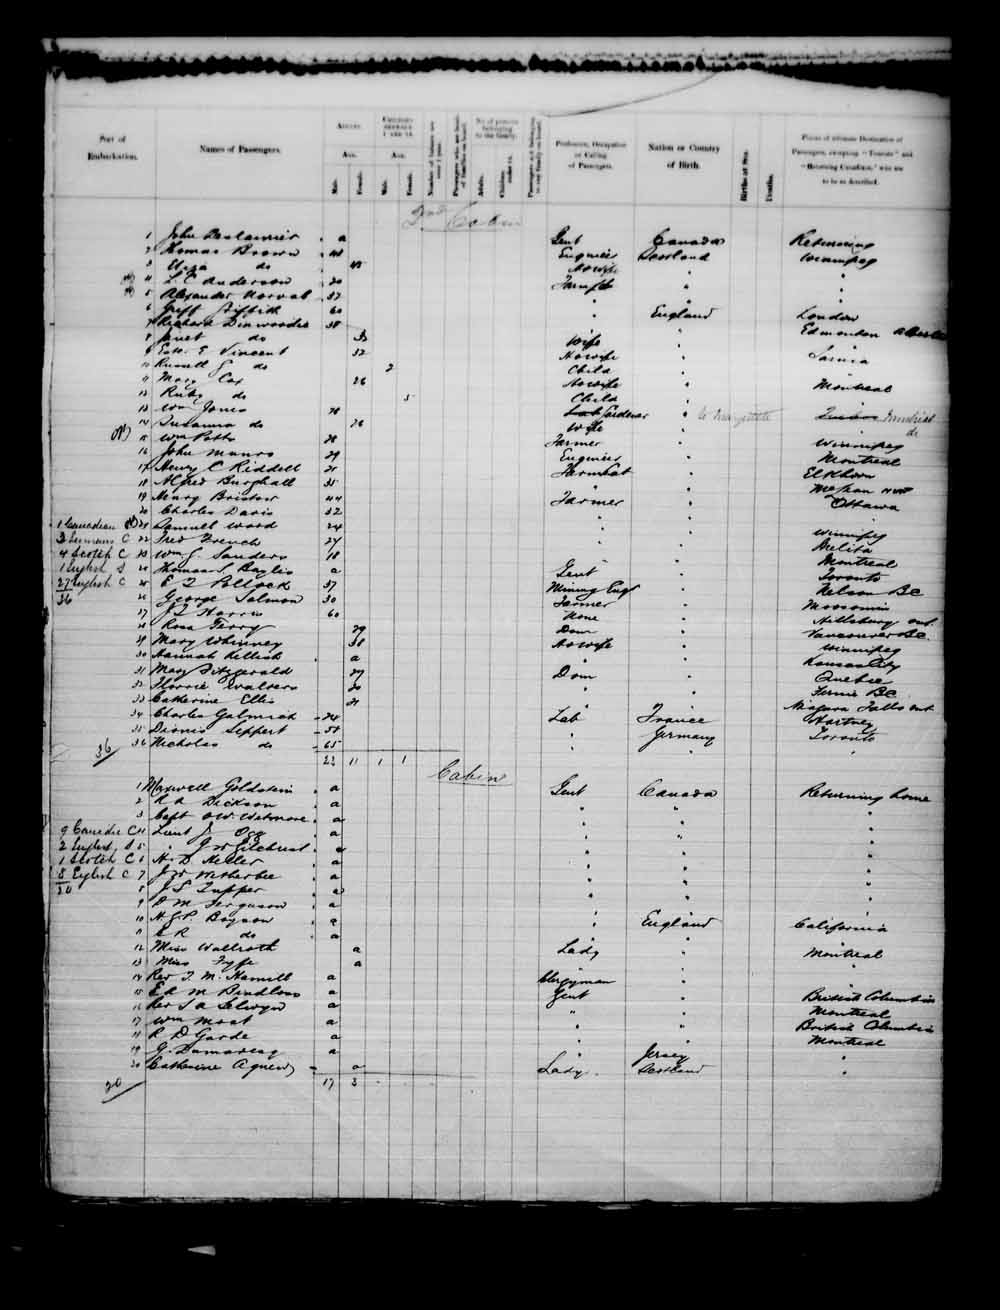 Digitized page of Quebec Passenger Lists for Image No.: e003555834